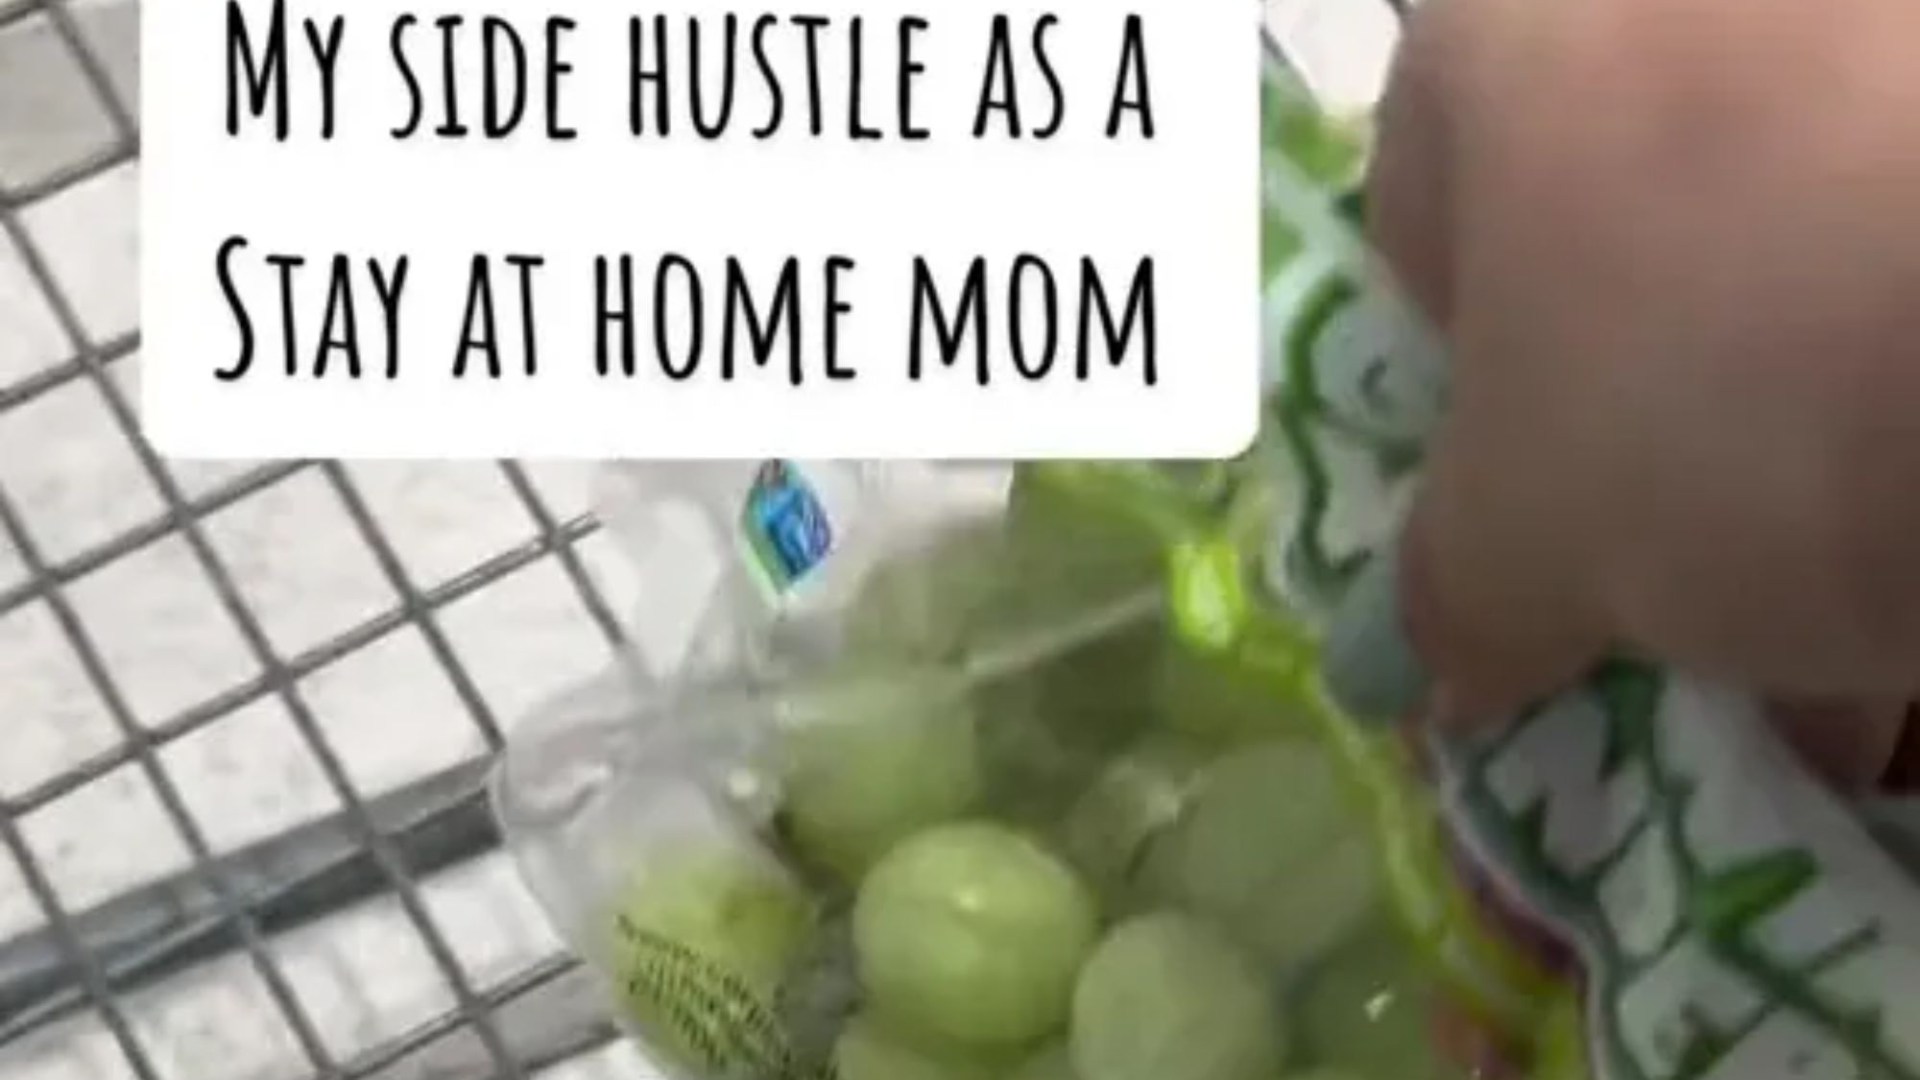 I wanted to be a stay-at-home mum so set up a side hustle in my kitchen using a punnet of grapes – I make 150 an hour [Video]